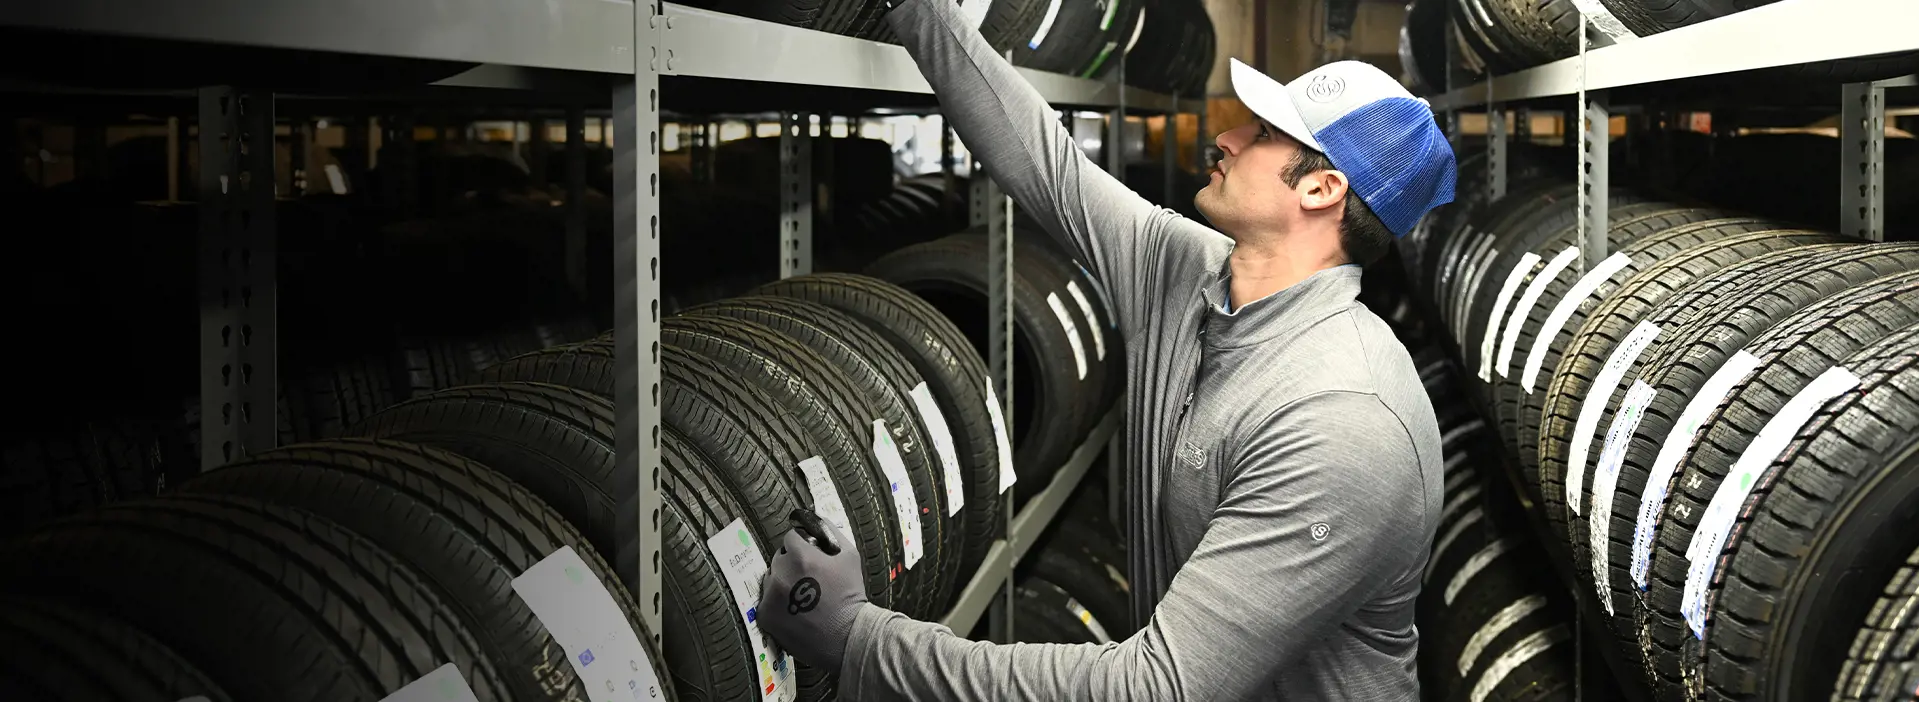 Get Deals On The Tires And Service You Need